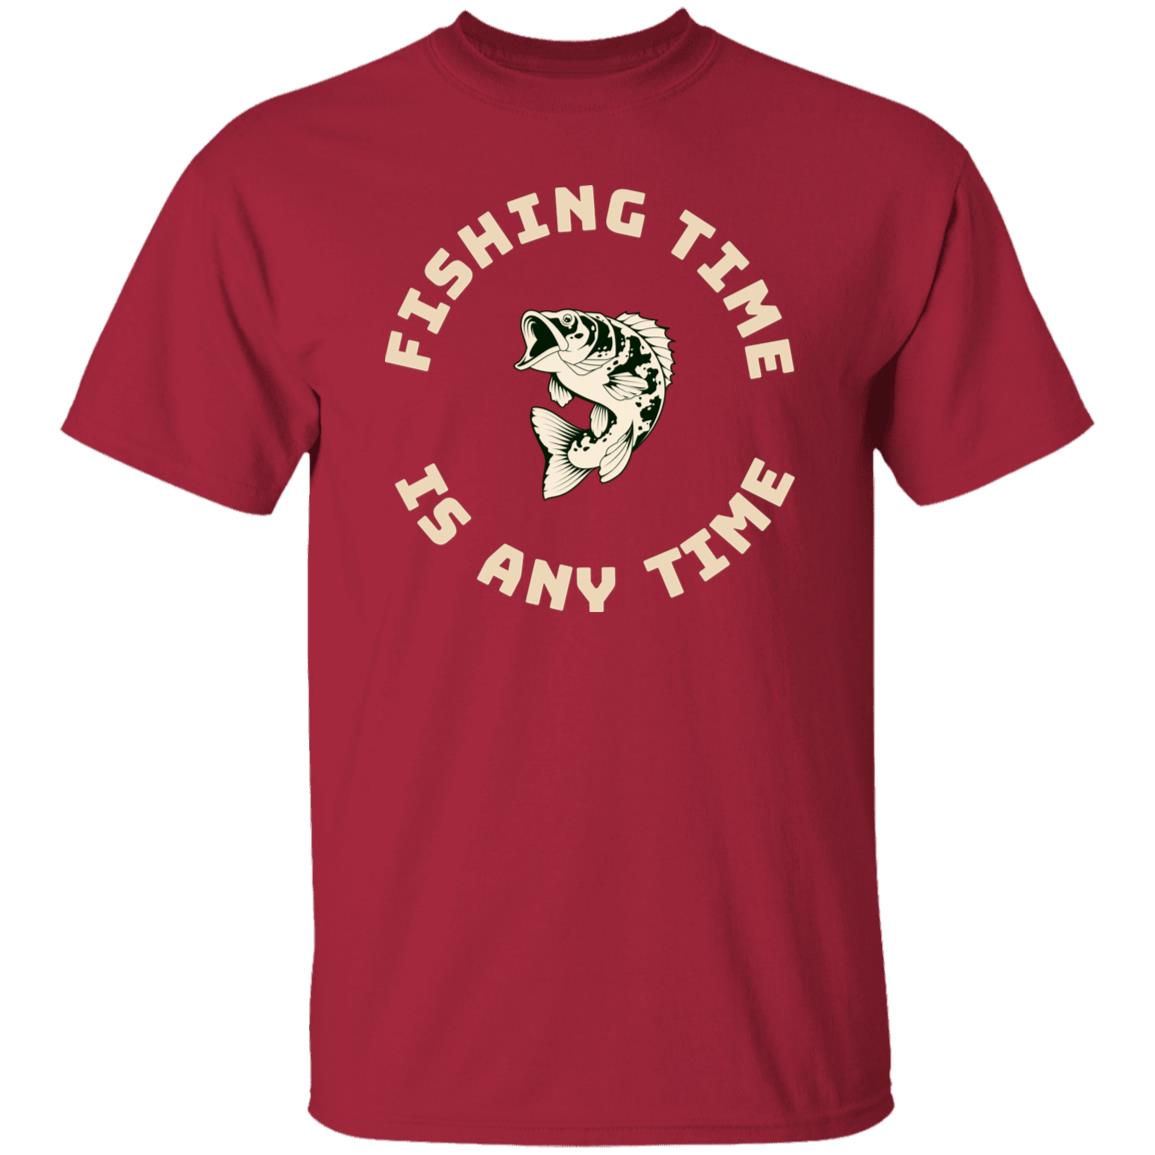 Fishing Time Is Any Time t-shirt k cardinal